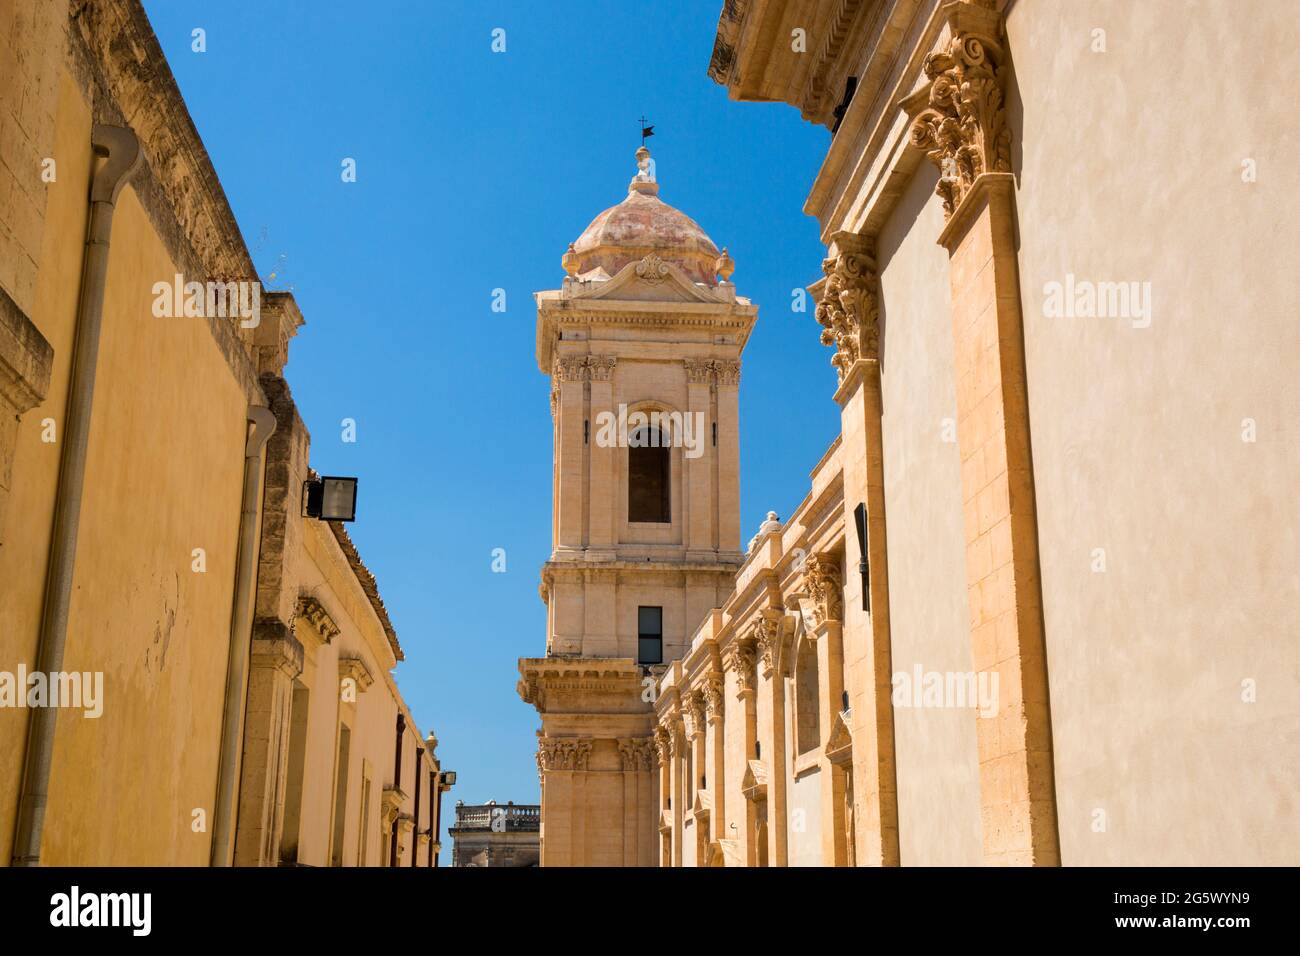 Noto, Syracuse, Sicily, Italy. View along sunlit narrow street to clock-tower of the baroque Cathedral of San Nicolò. Stock Photo